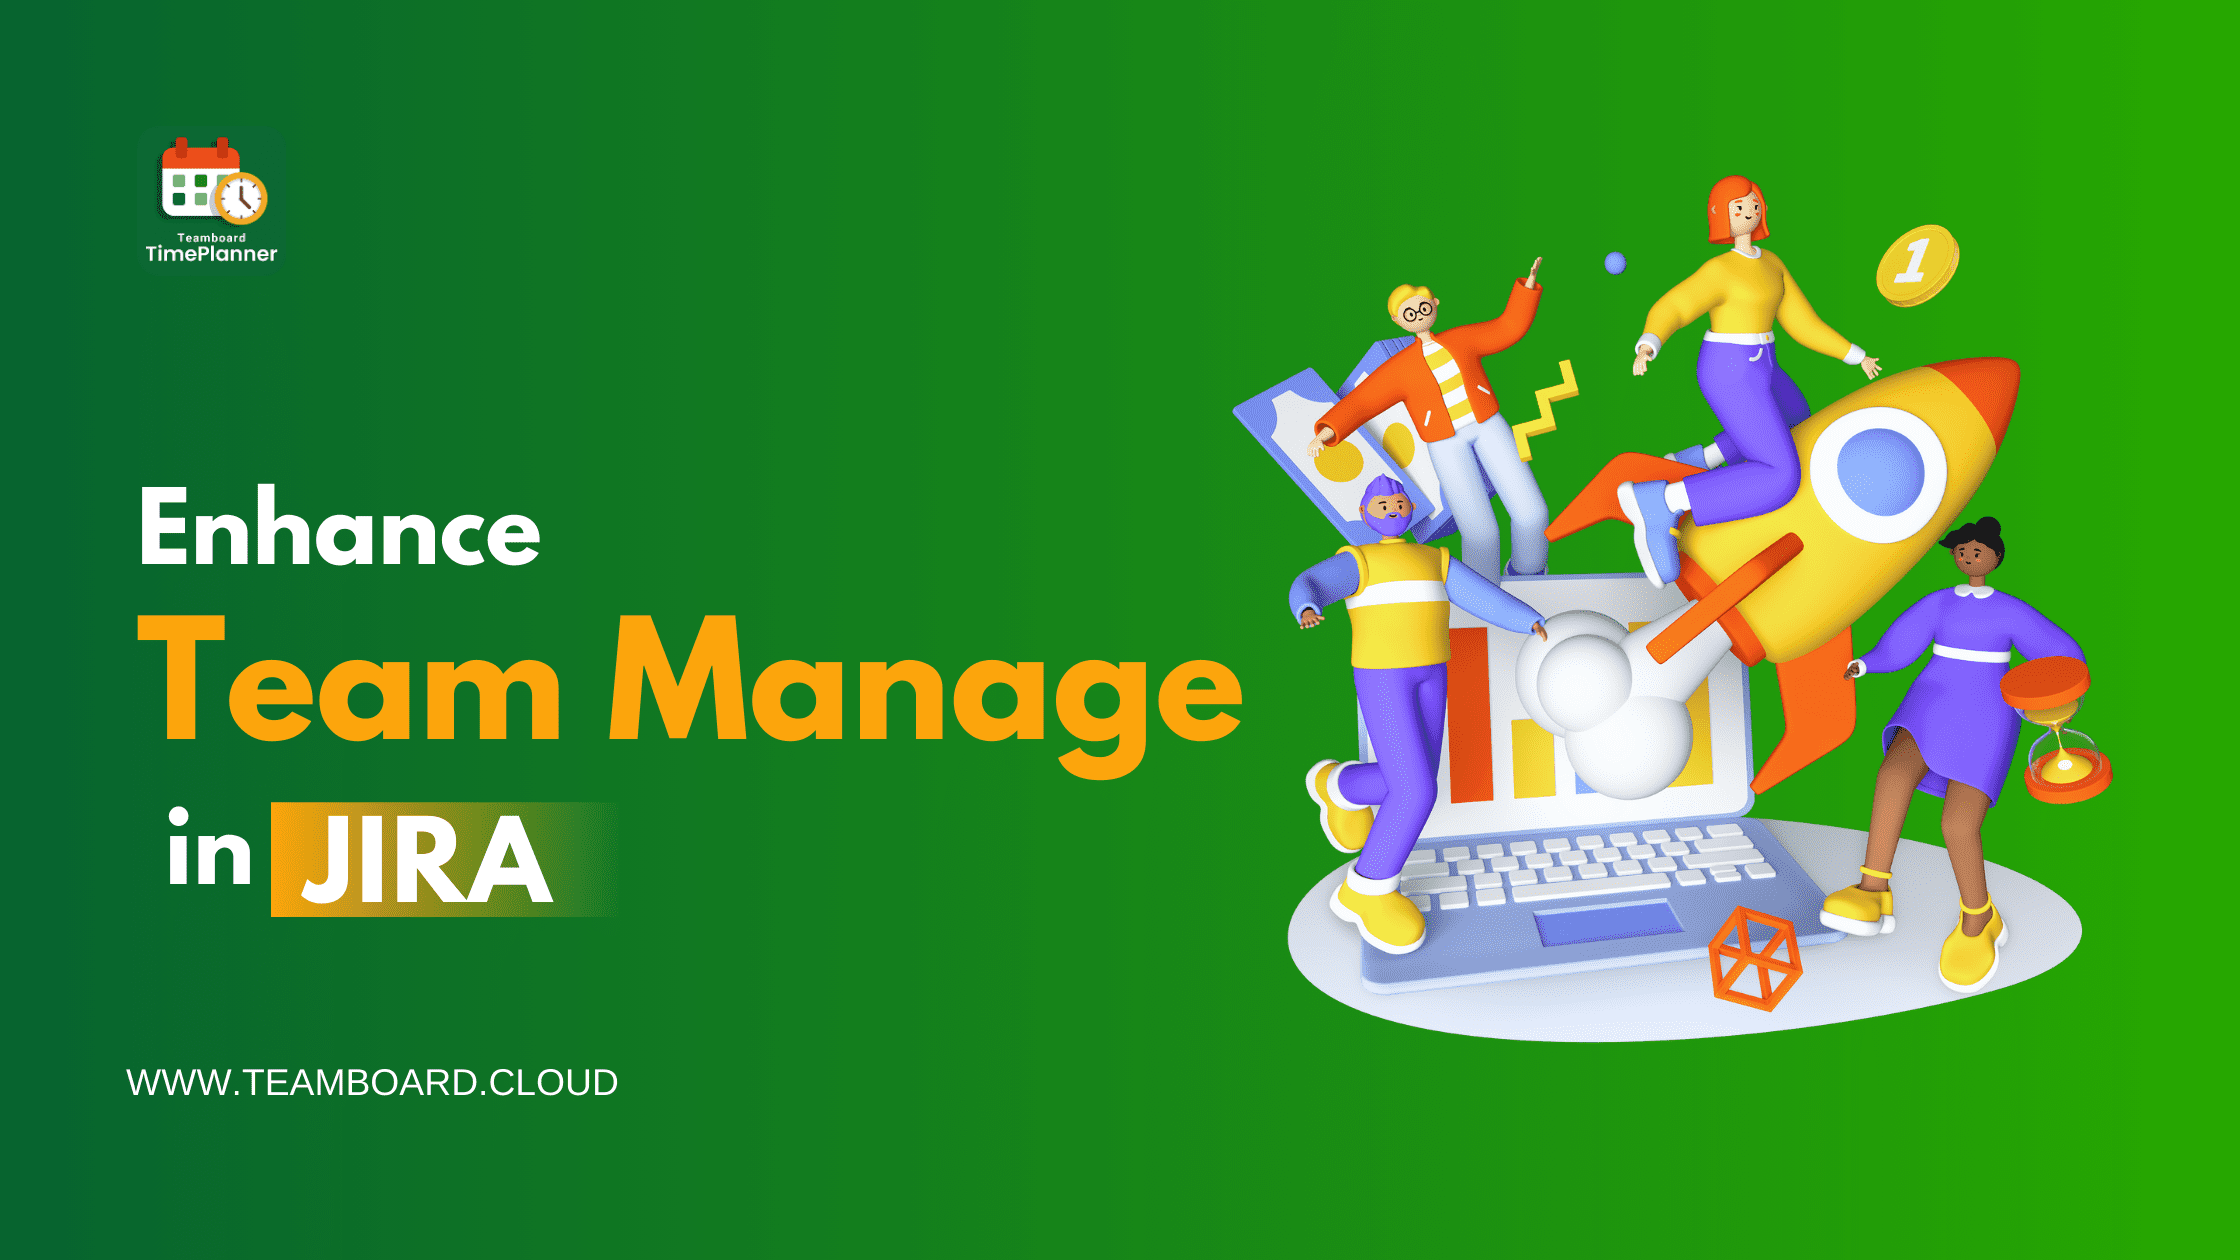 What Does a Project Manager Do to Enhance Team Management in JIRA